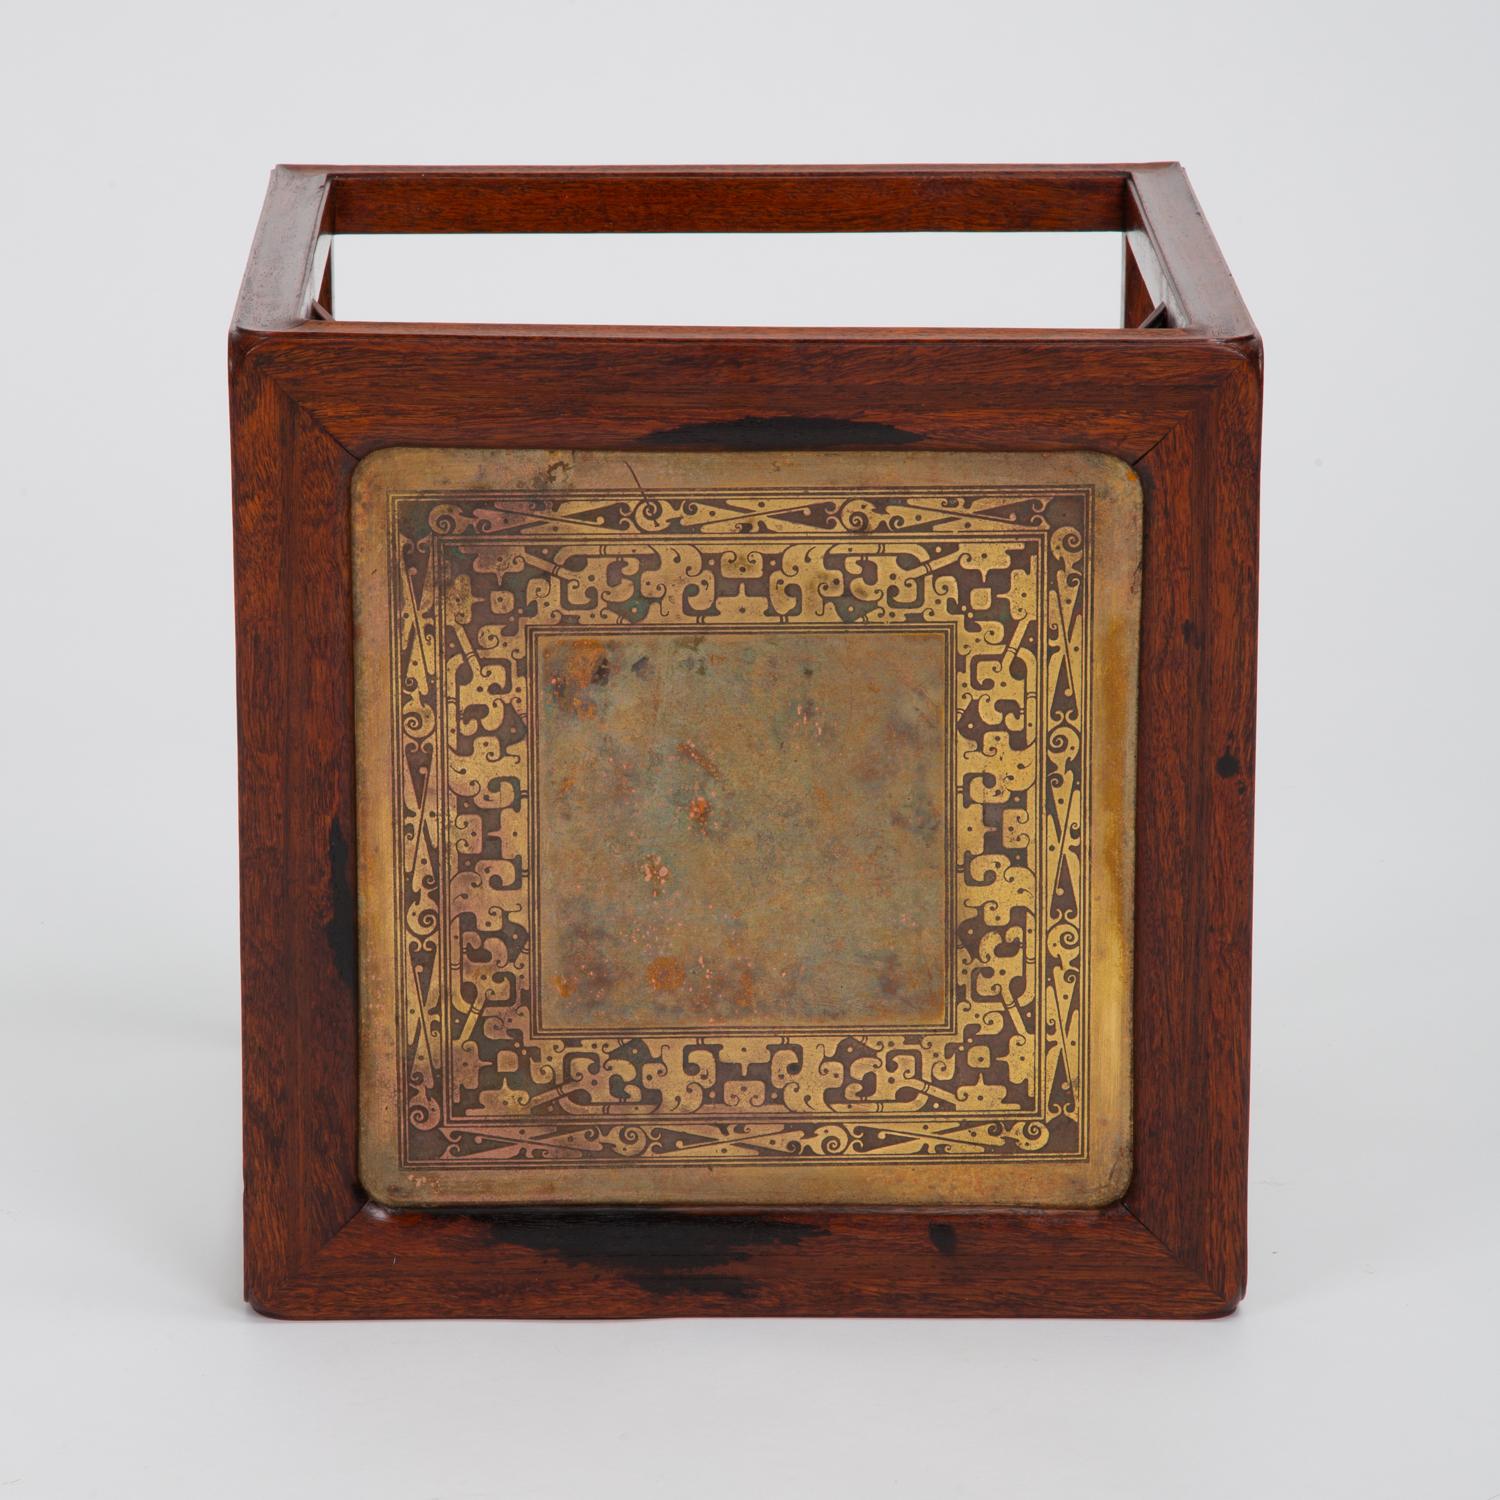 20th Century Small Cube Table in Solid Rosewood and Etched Brass